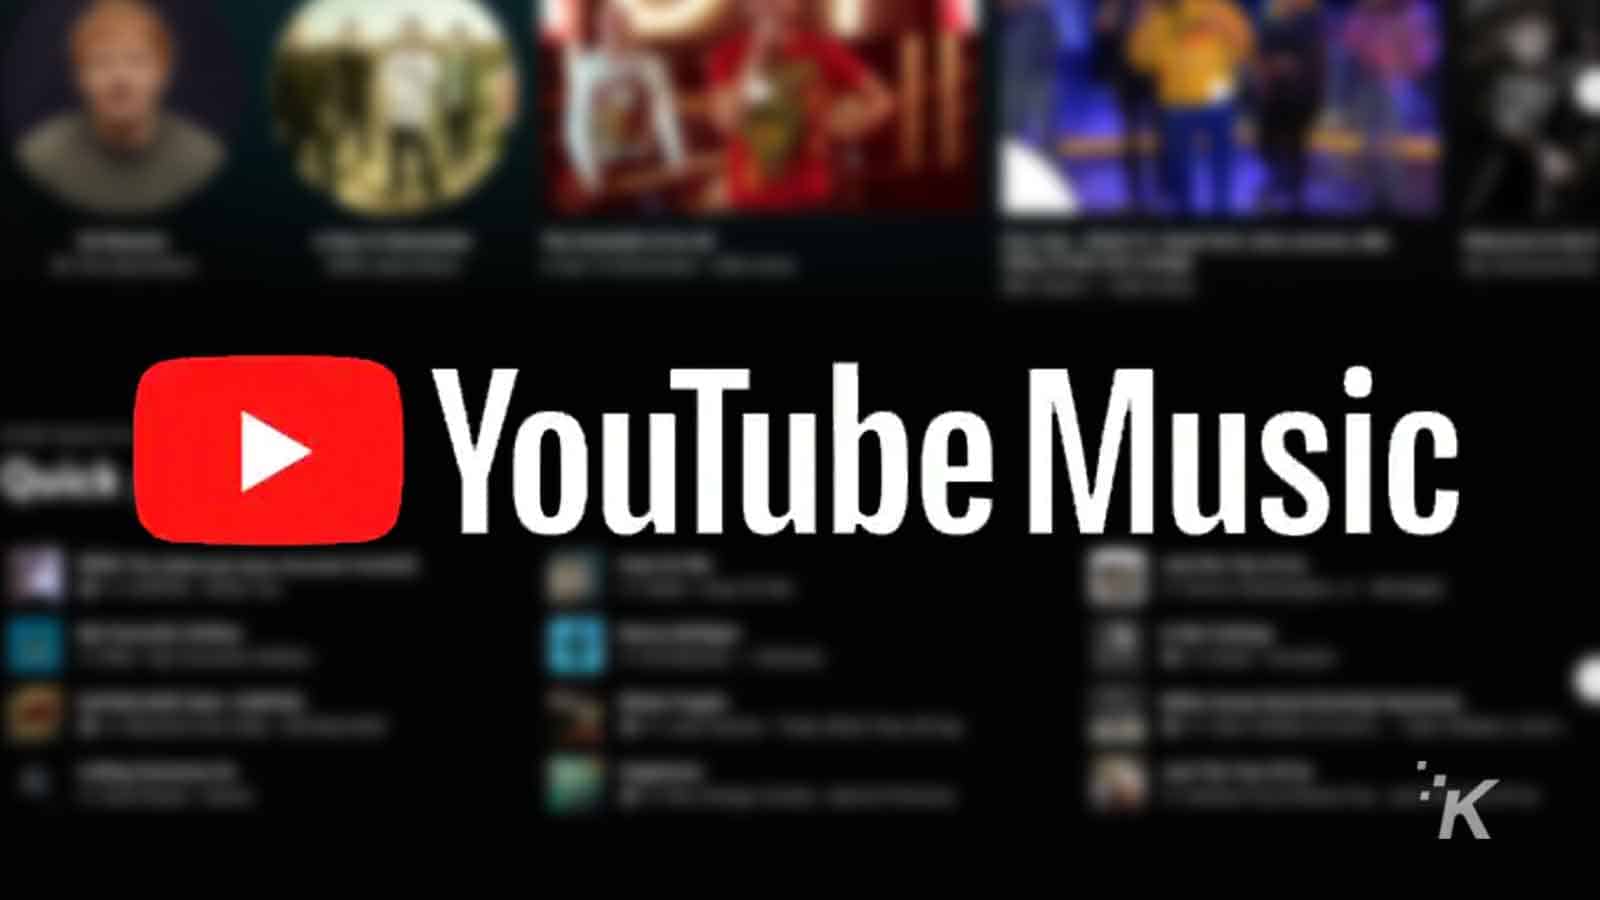 Youtube music logo with blurred background